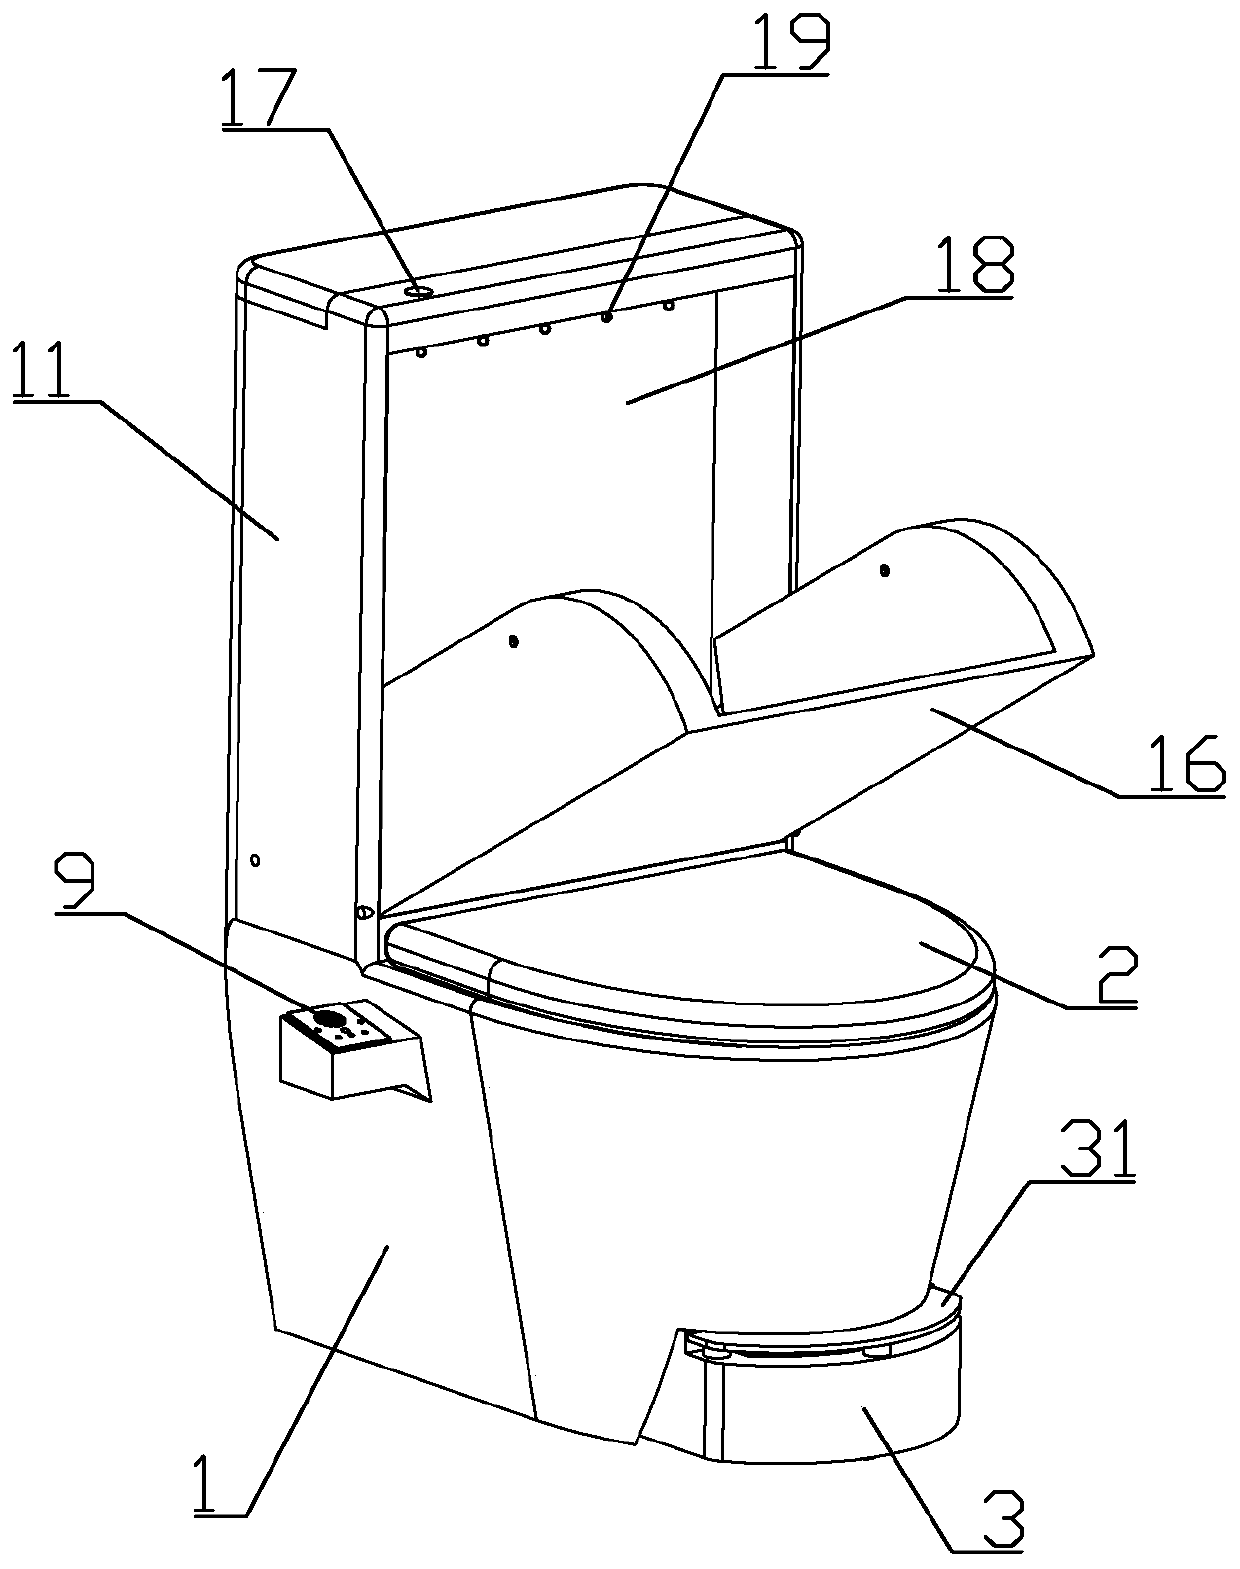 A multifunctional toilet